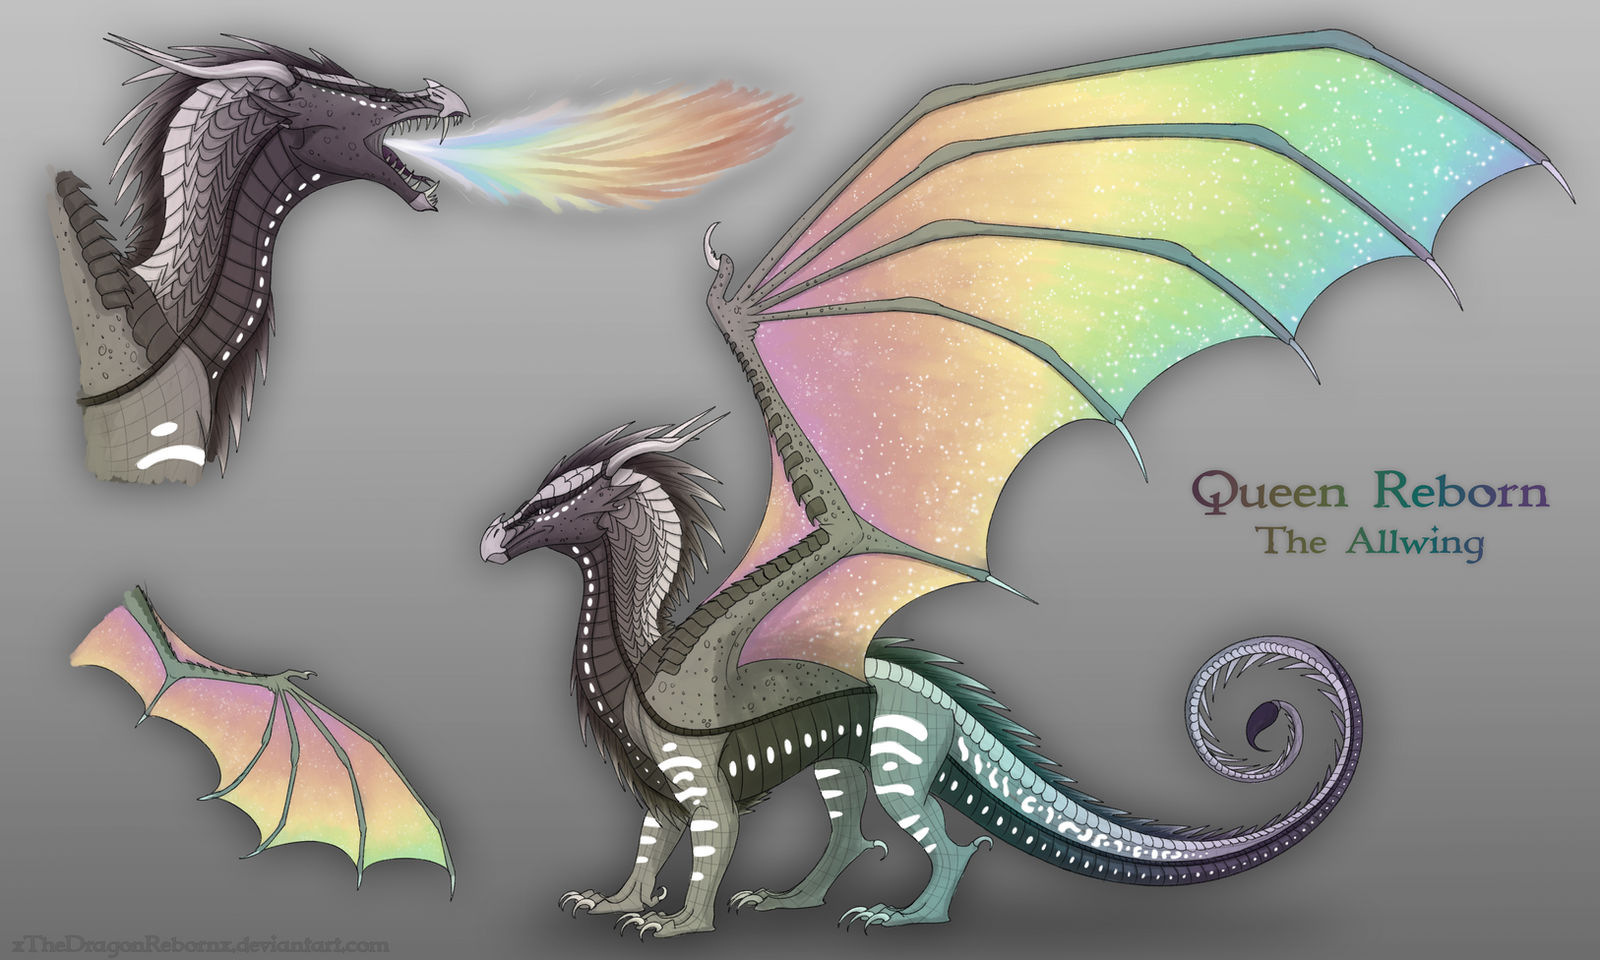 Queen Reborn The Allwing By Xthedragonrebornx On Deviantart - glory wings of fire roblox